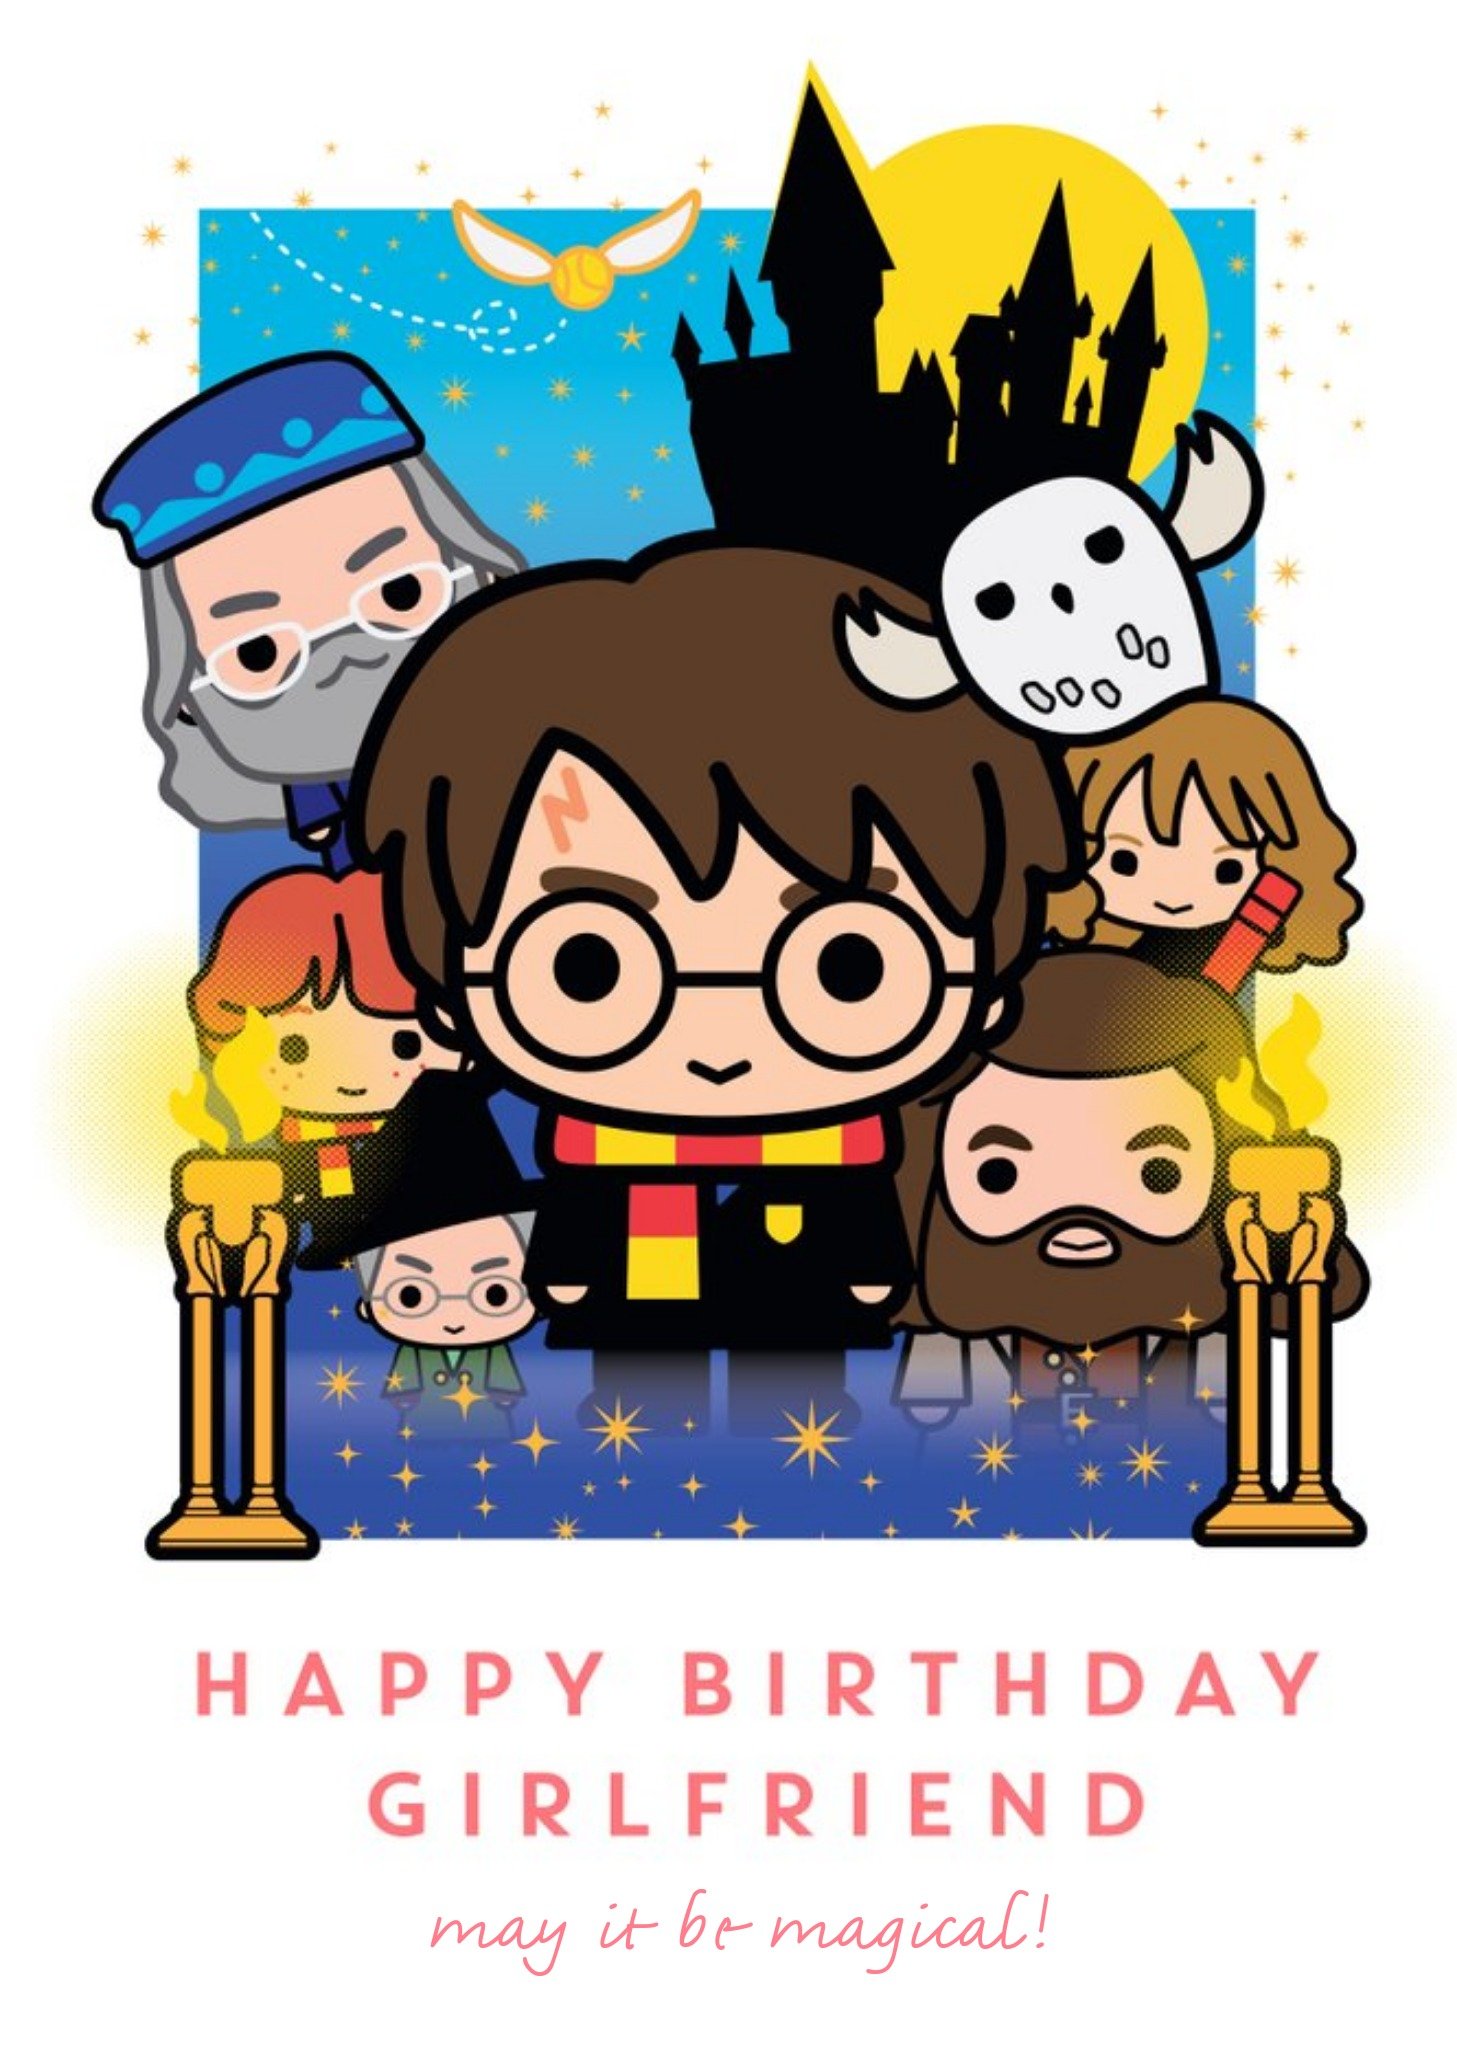 Harry Potter Birthday Card - May It Be Magical - Girlfriend, Large